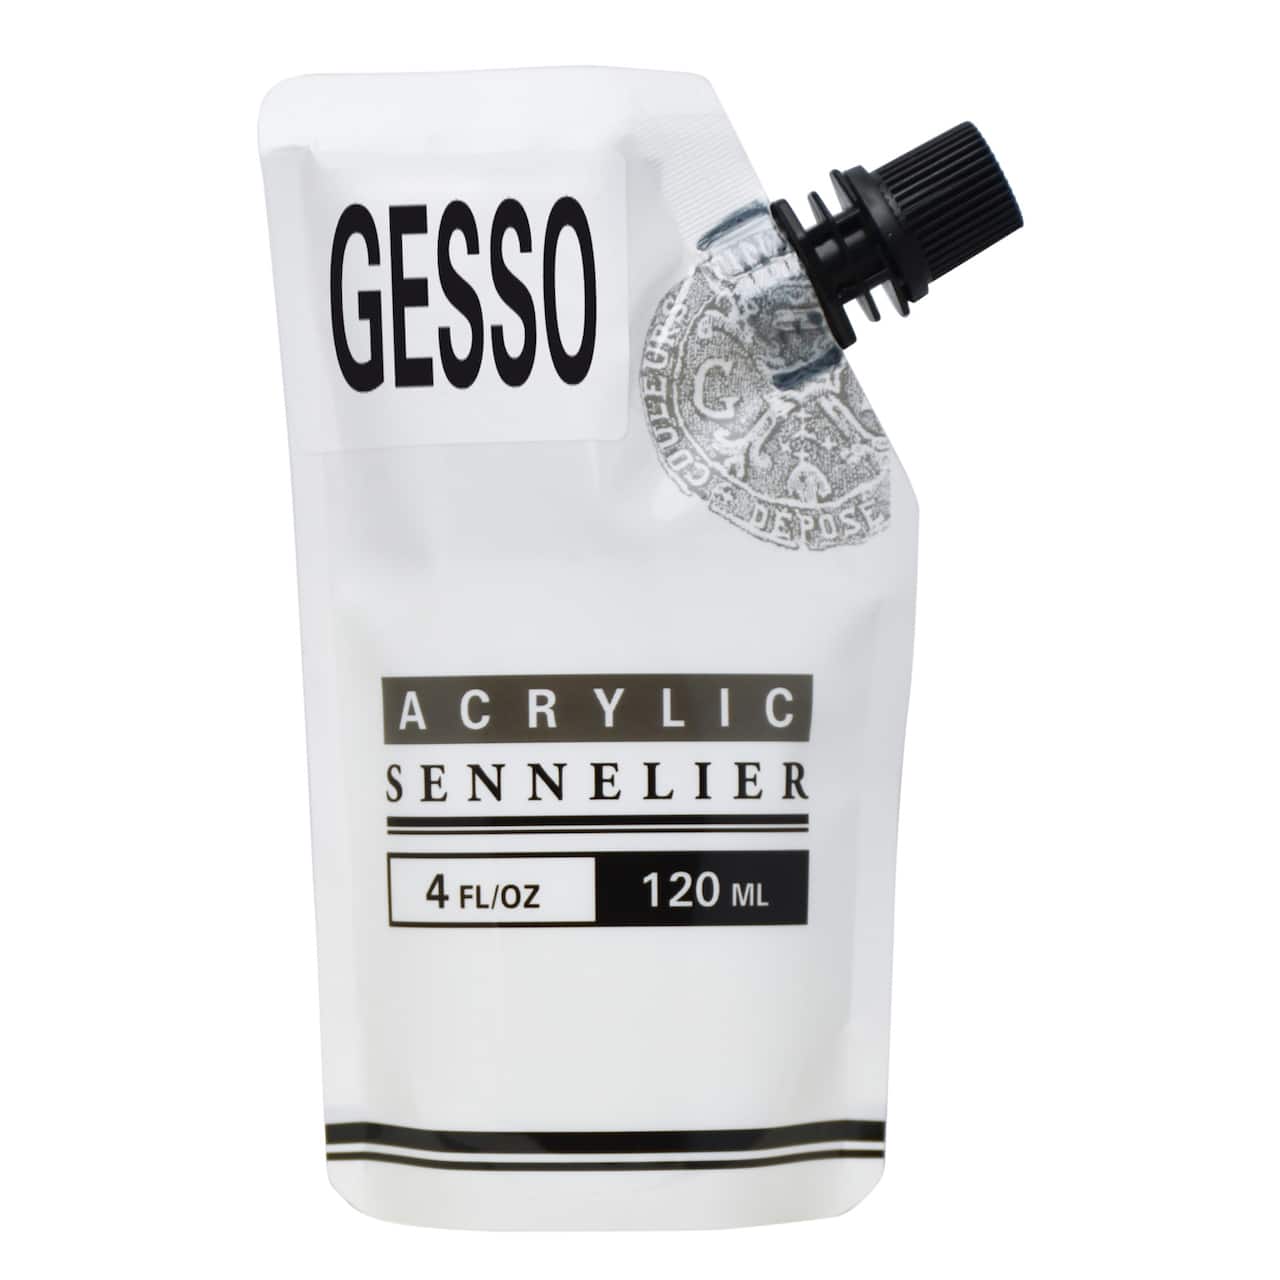 Sennelier Abstract Gesso, 120mL